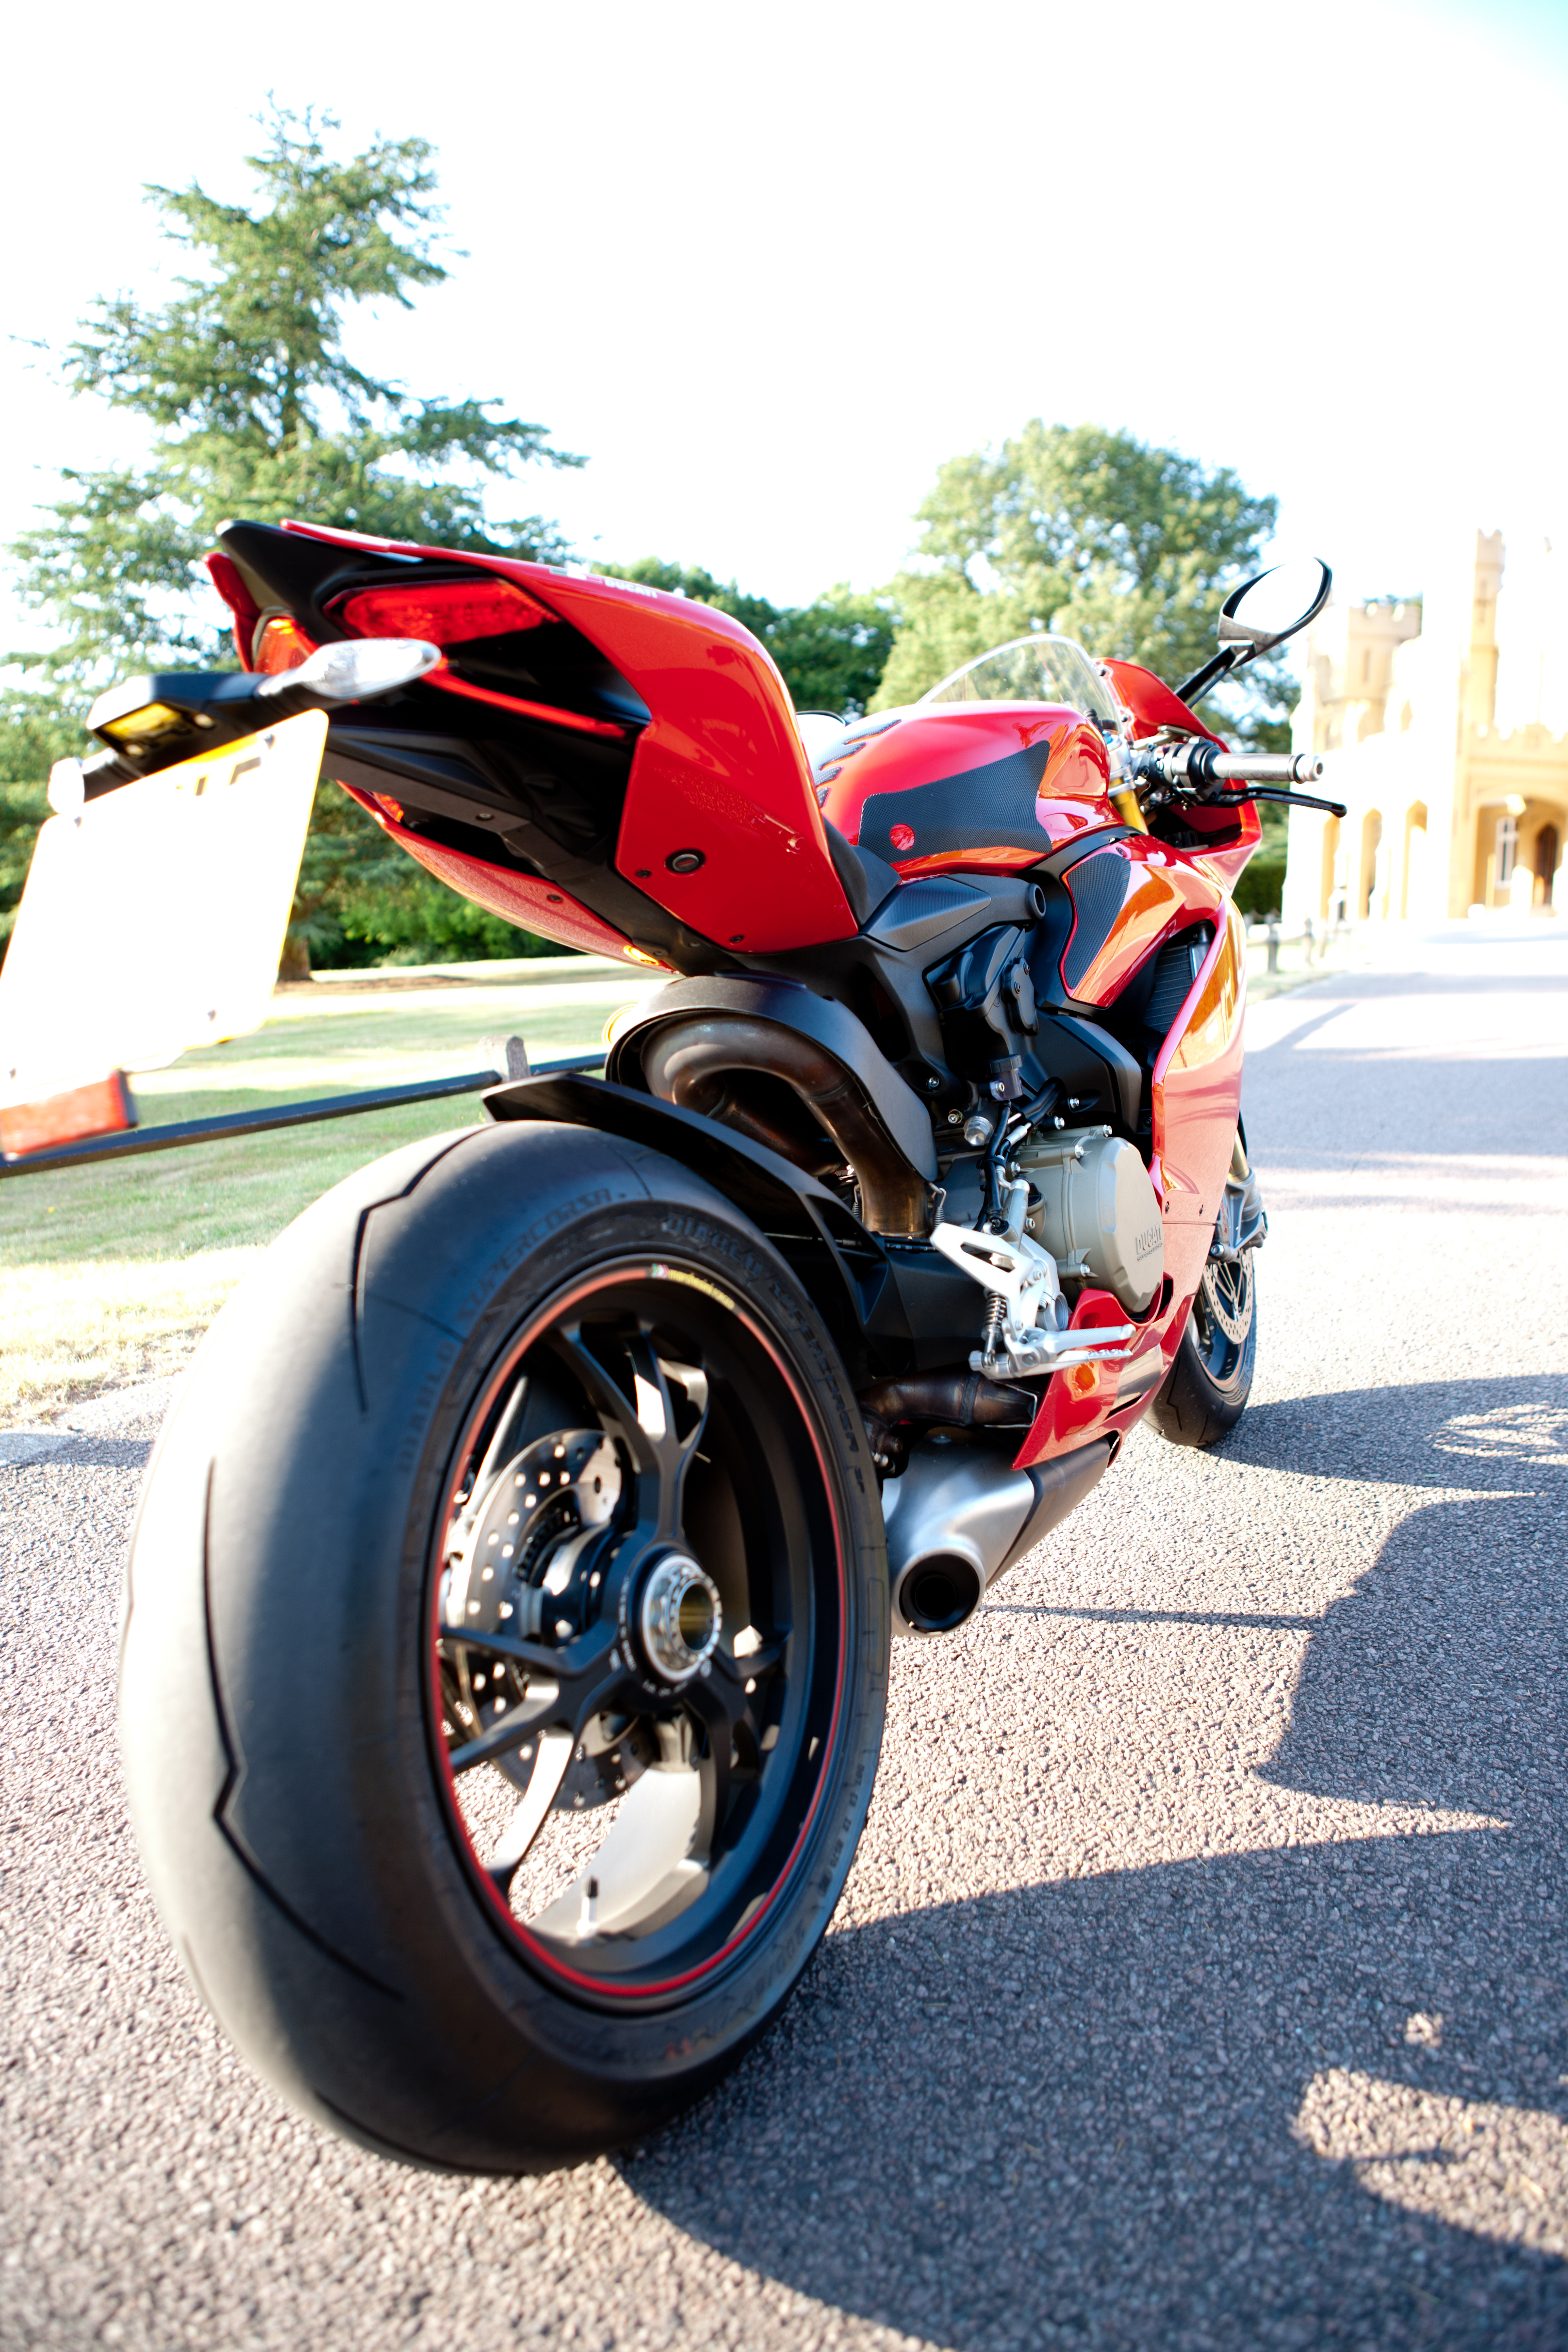 1299 Panigale S review